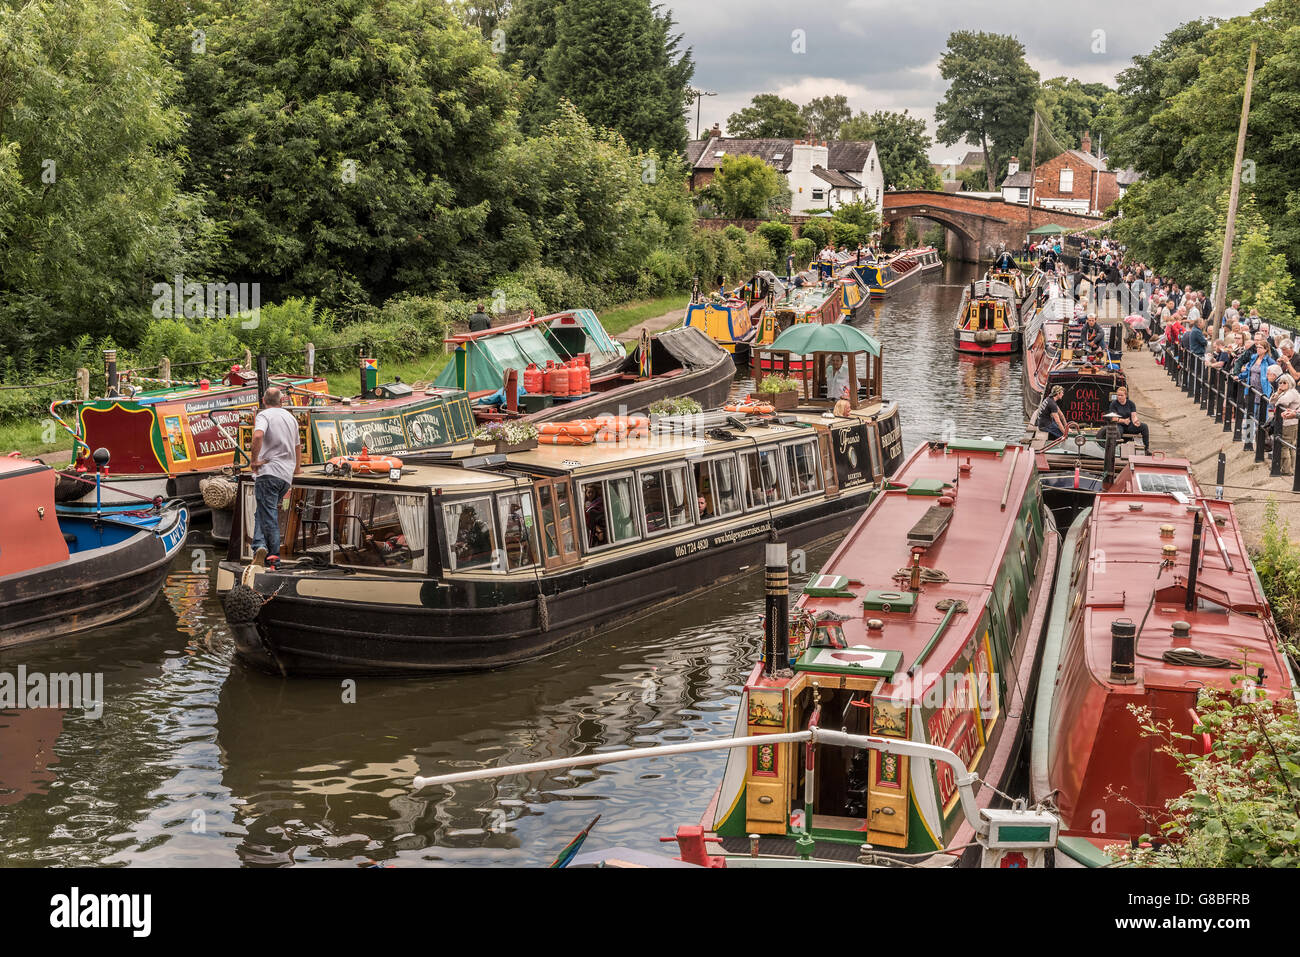 Vintage transport day at Lymm in Cheshire North West England. Parade of canal narrowboats on the Bridgewater. Stock Photo